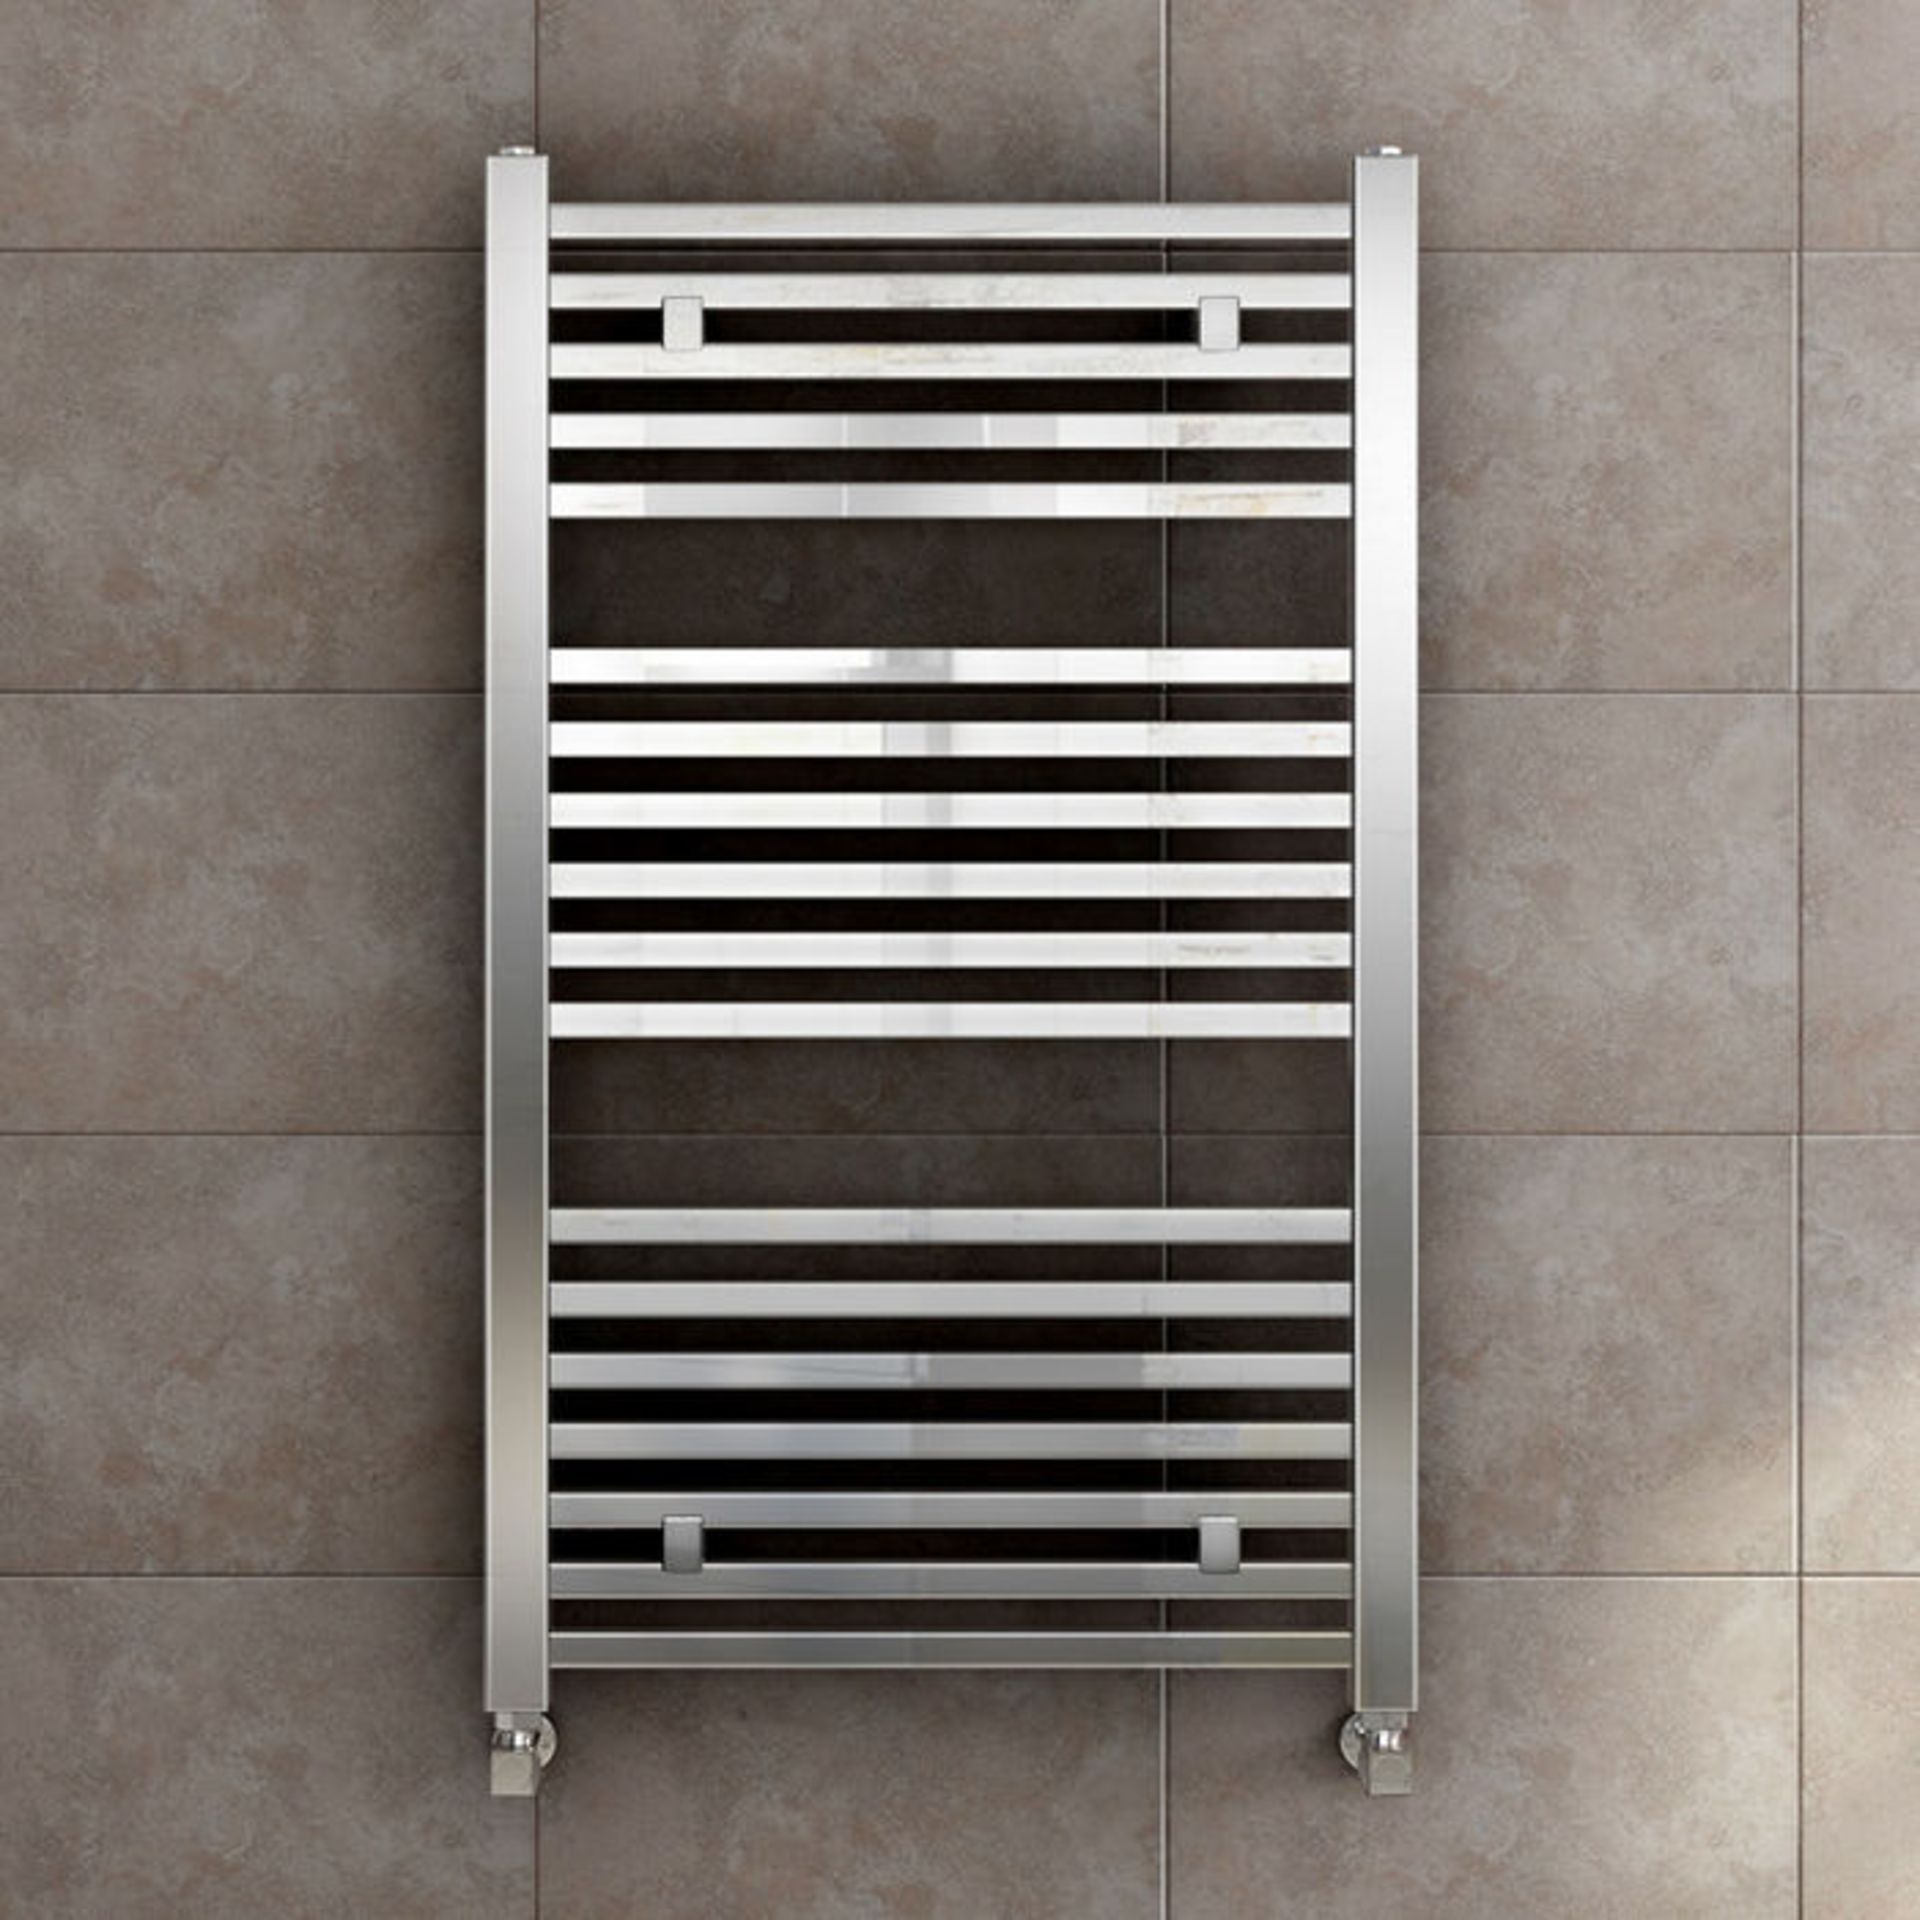 (G53) 1000x600mm Chrome Square Rail Ladder Towel Radiator RRP £226.99 Low carbon steel chrome plated - Image 4 of 4